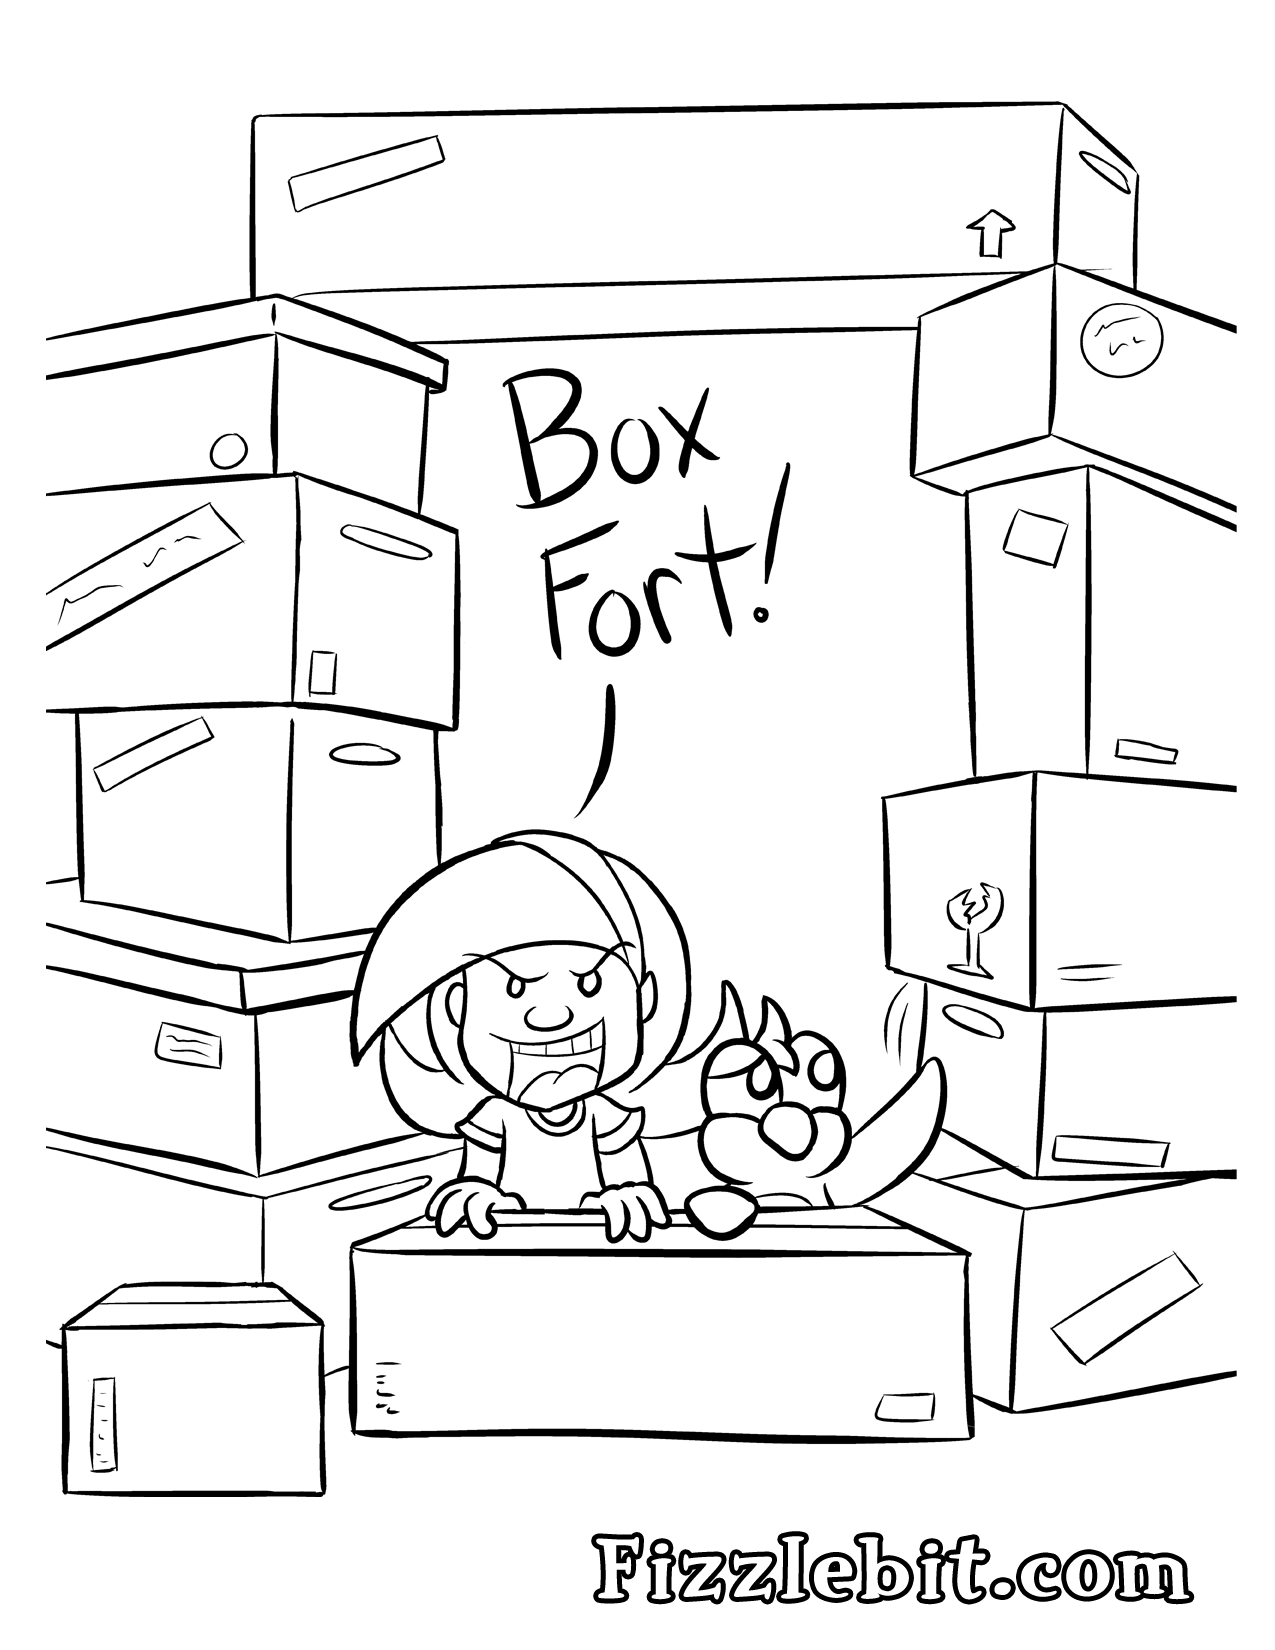 Box forts are the only true forts.